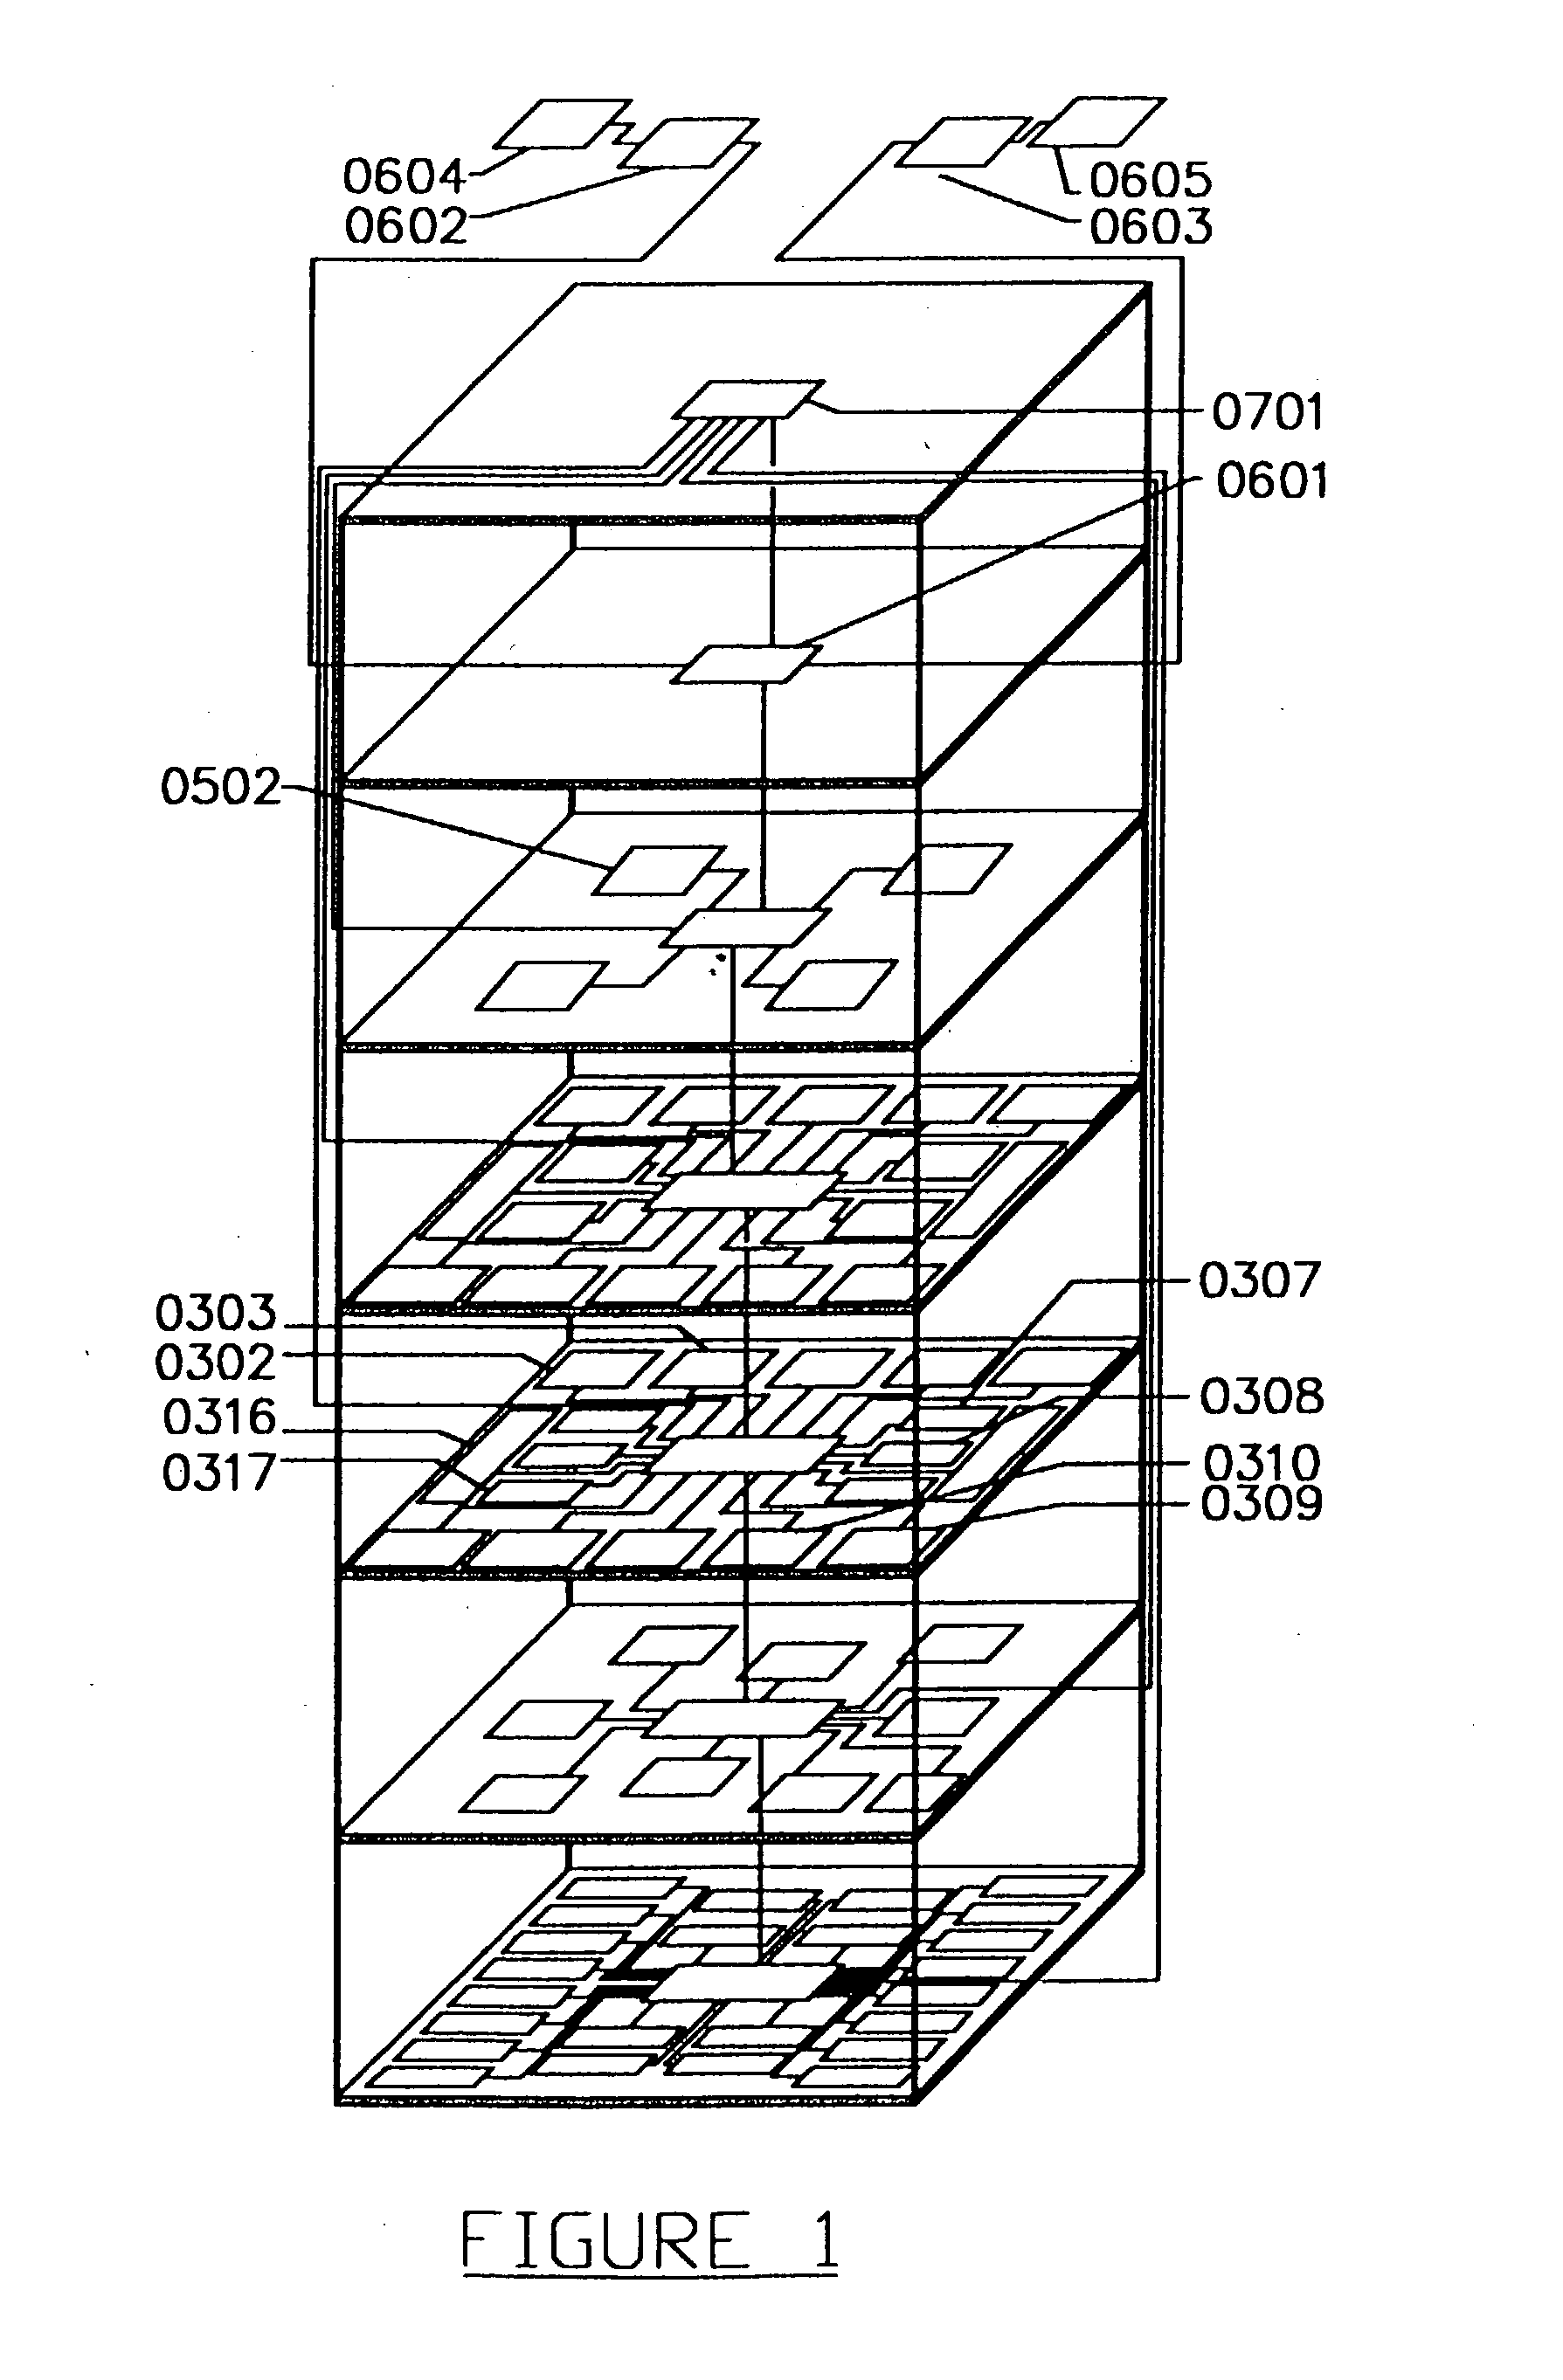 Automated and integrated acquisition system and process